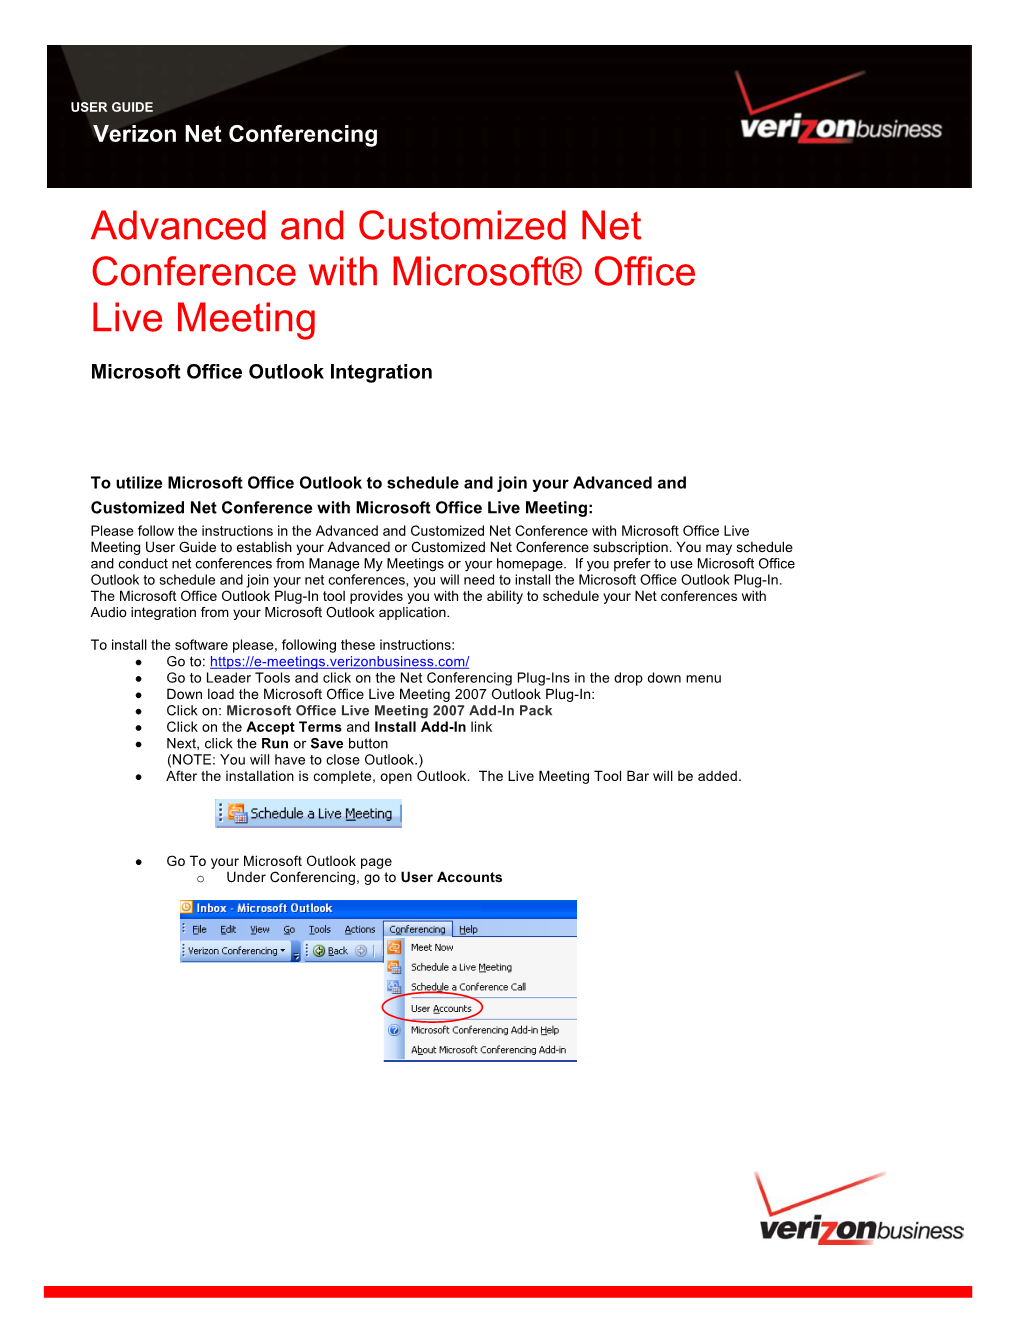 Advanced and Customized Net Conference with Microsoft® Office Live Meeting